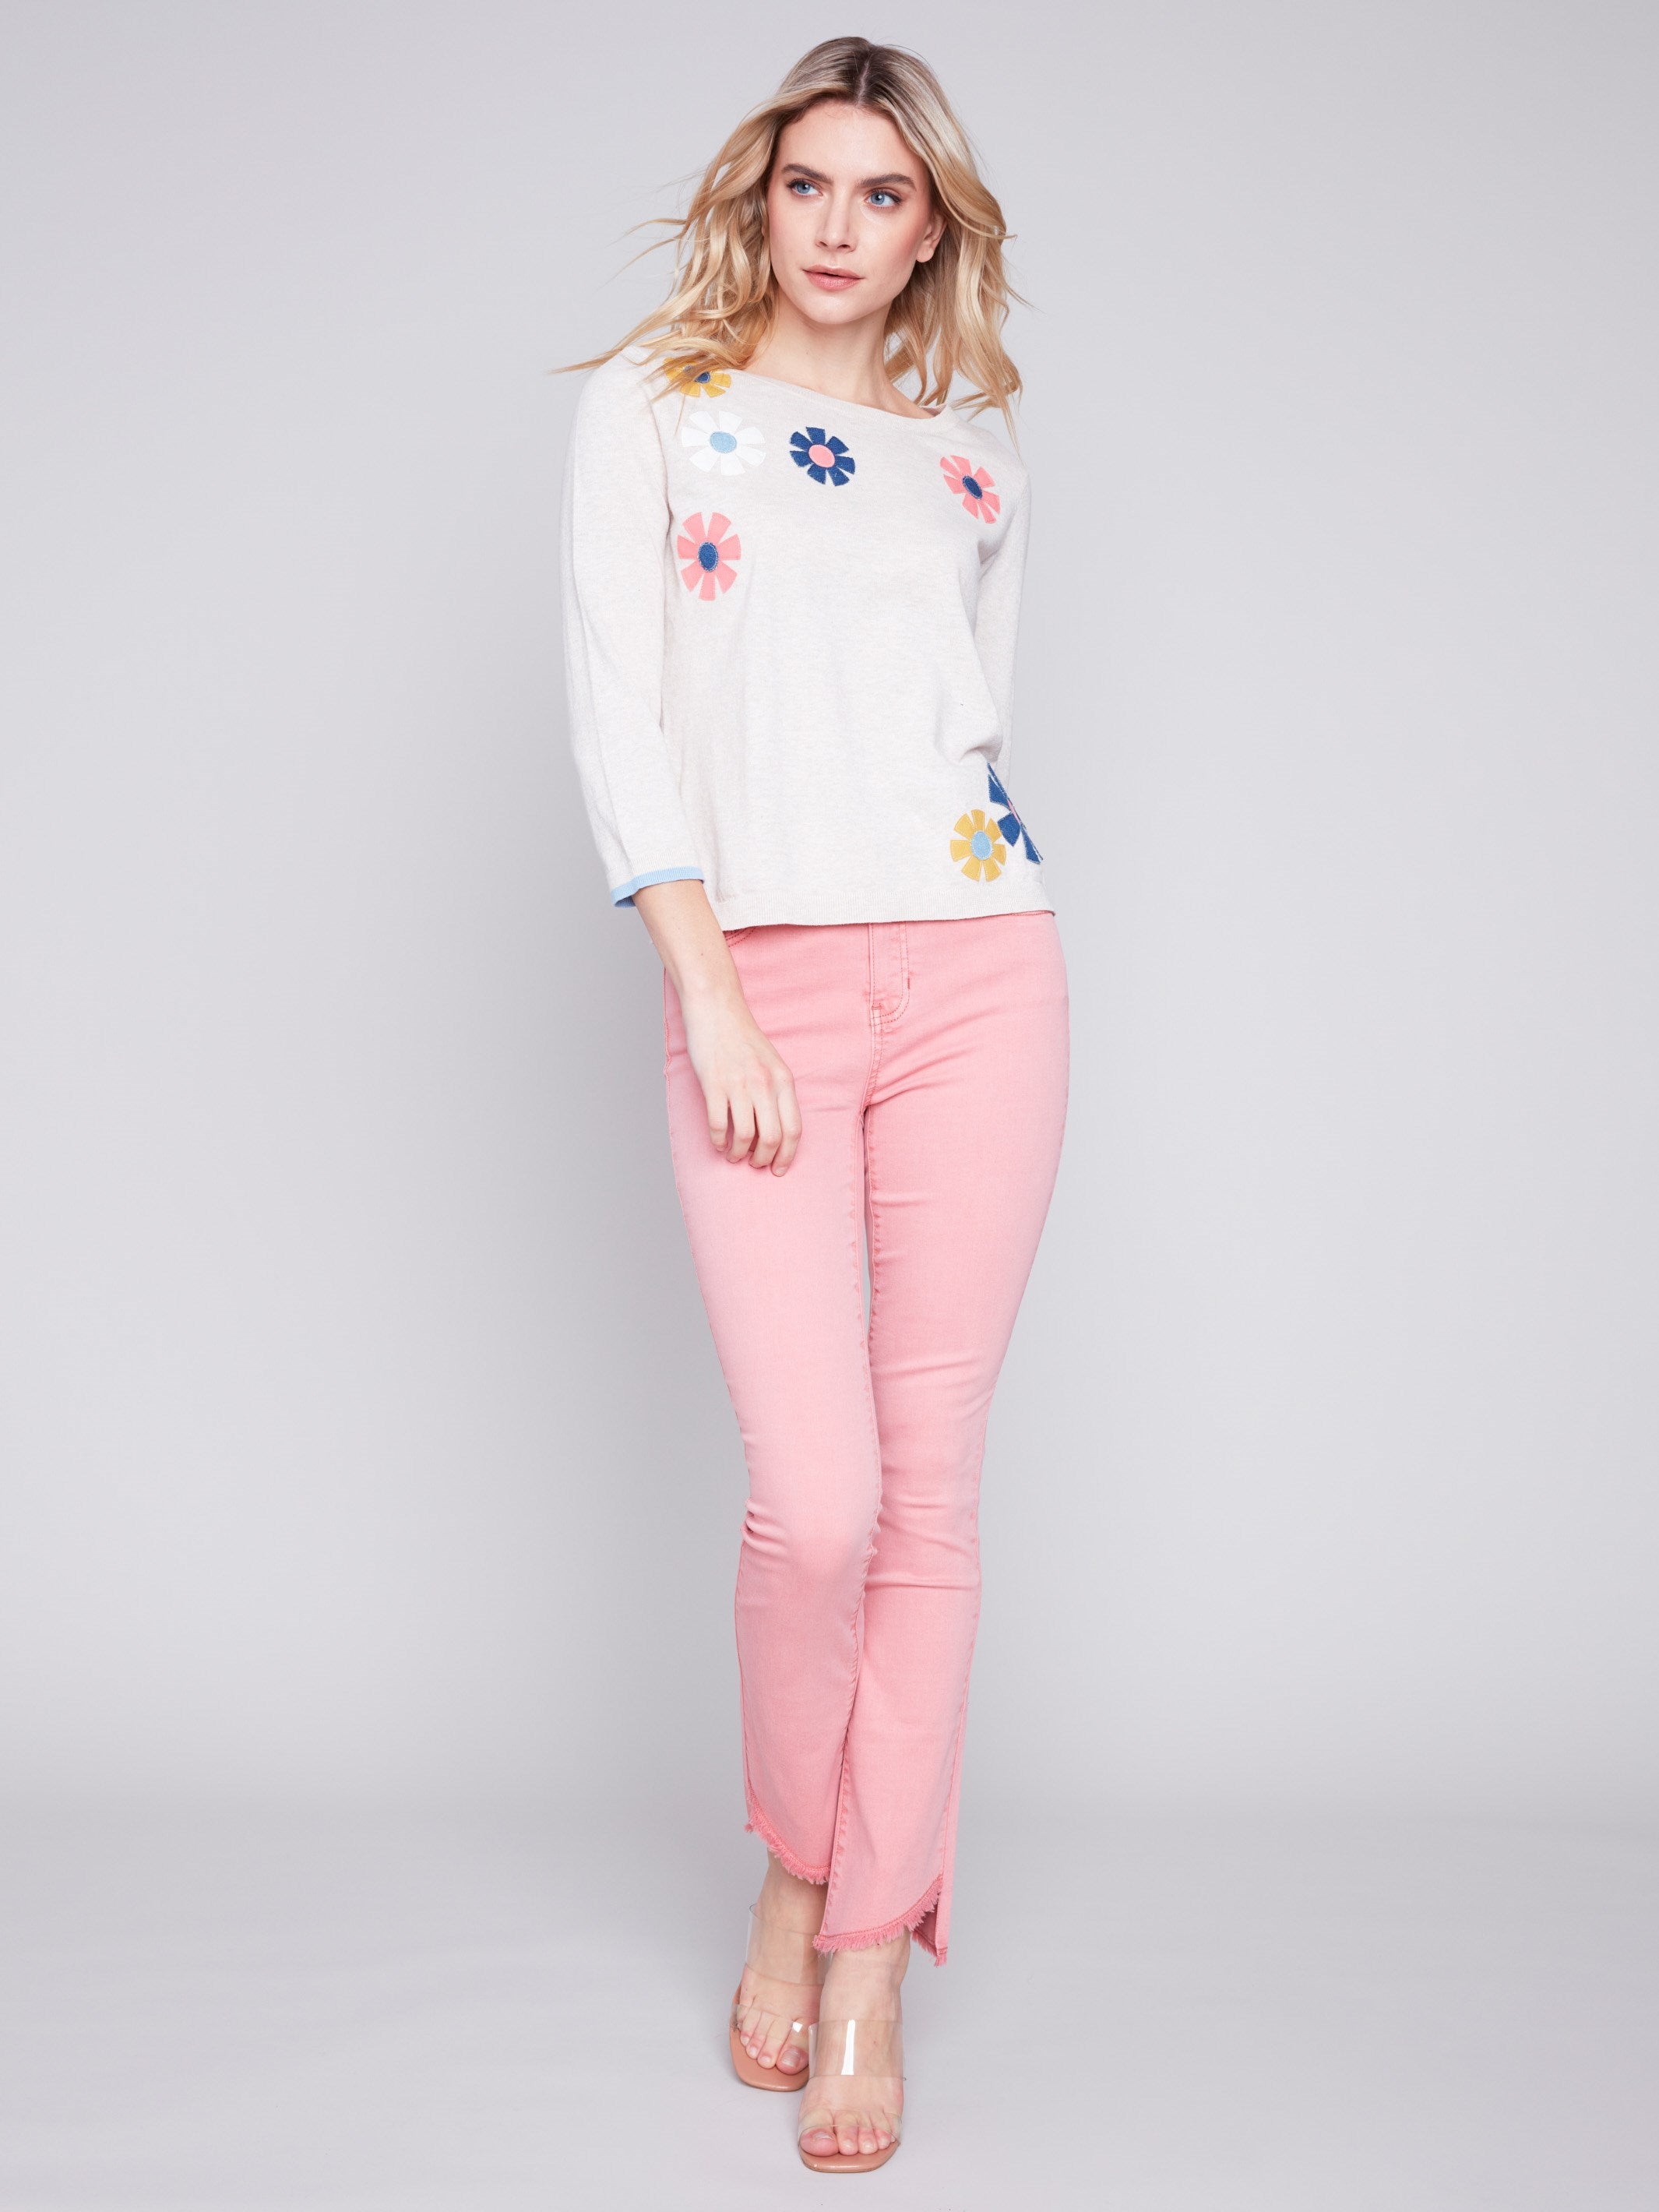 Sweater with Flower Patches - Beige - Charlie B Collection Canada - Image 2